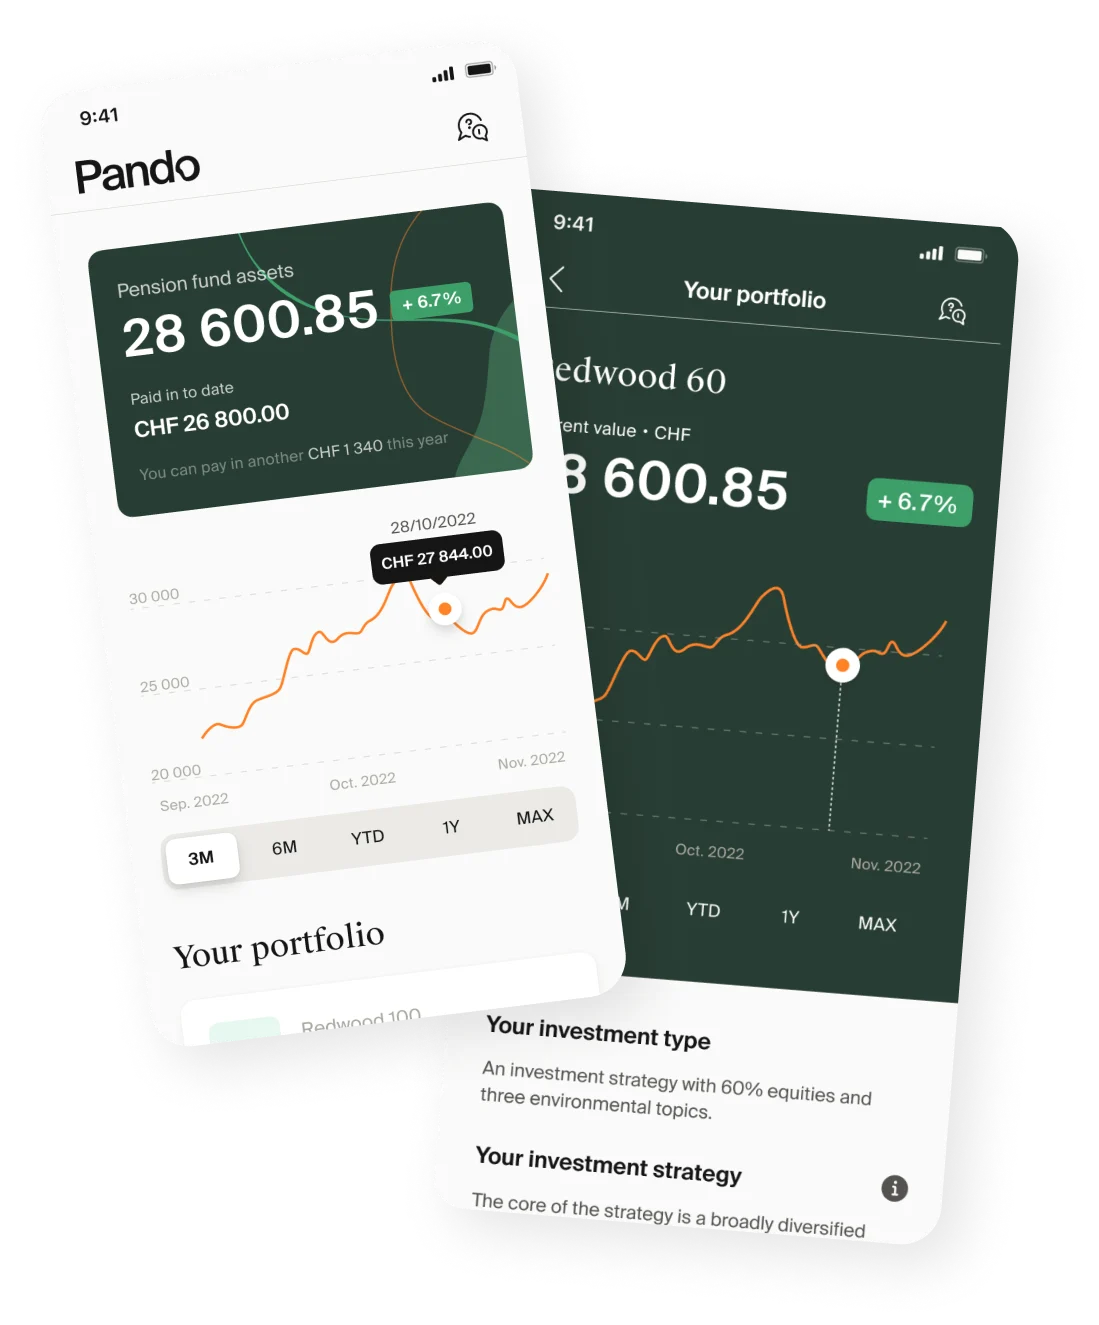 Pando investment products